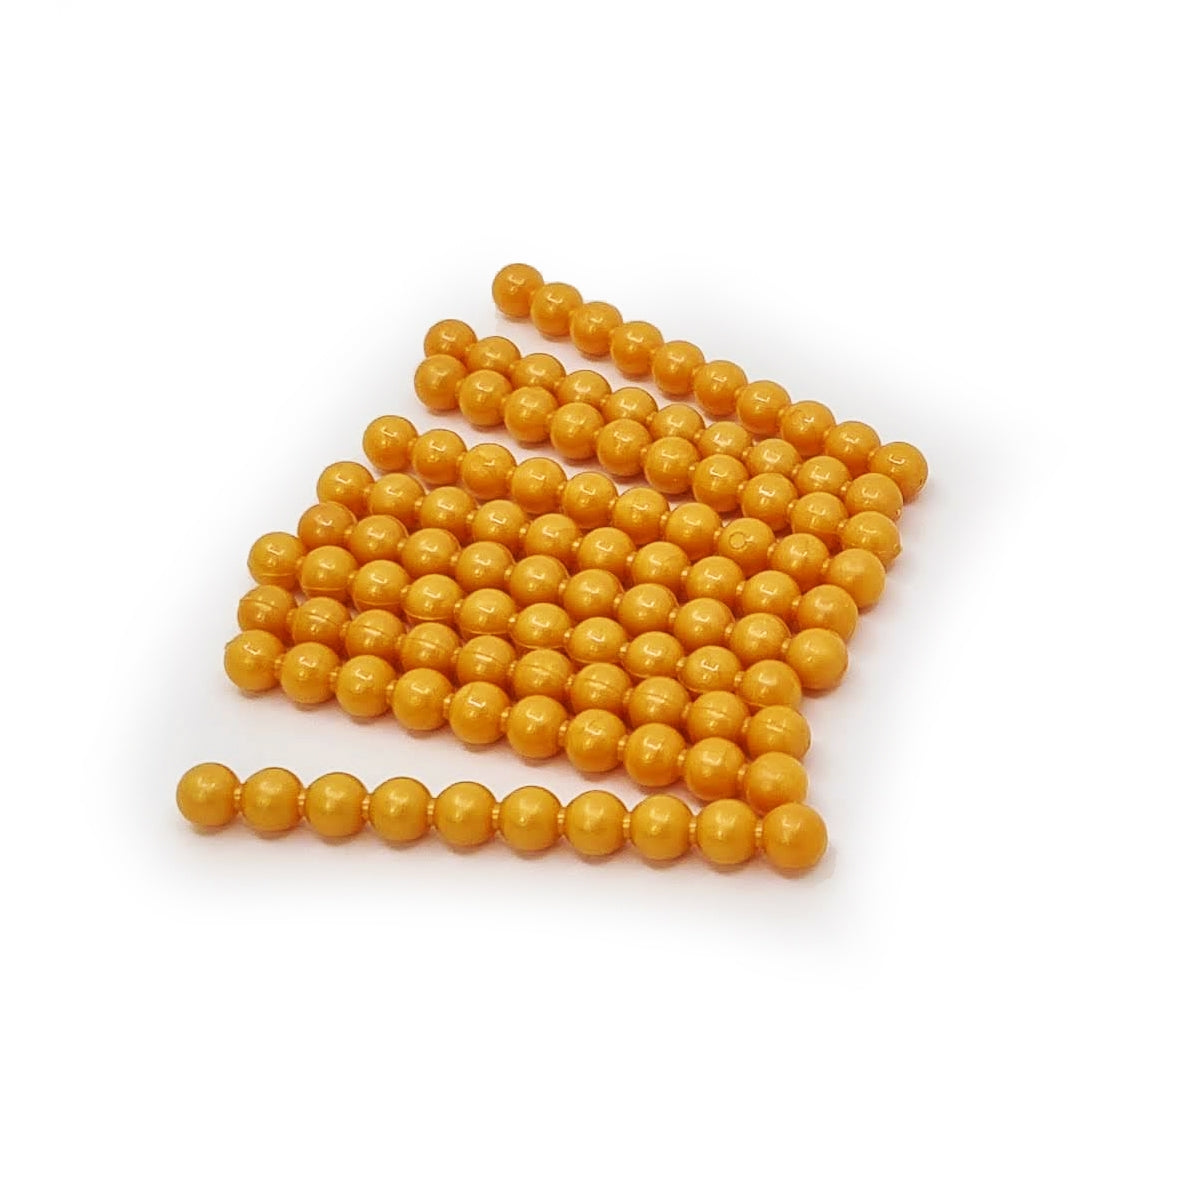 Bead Material - Connected Beads